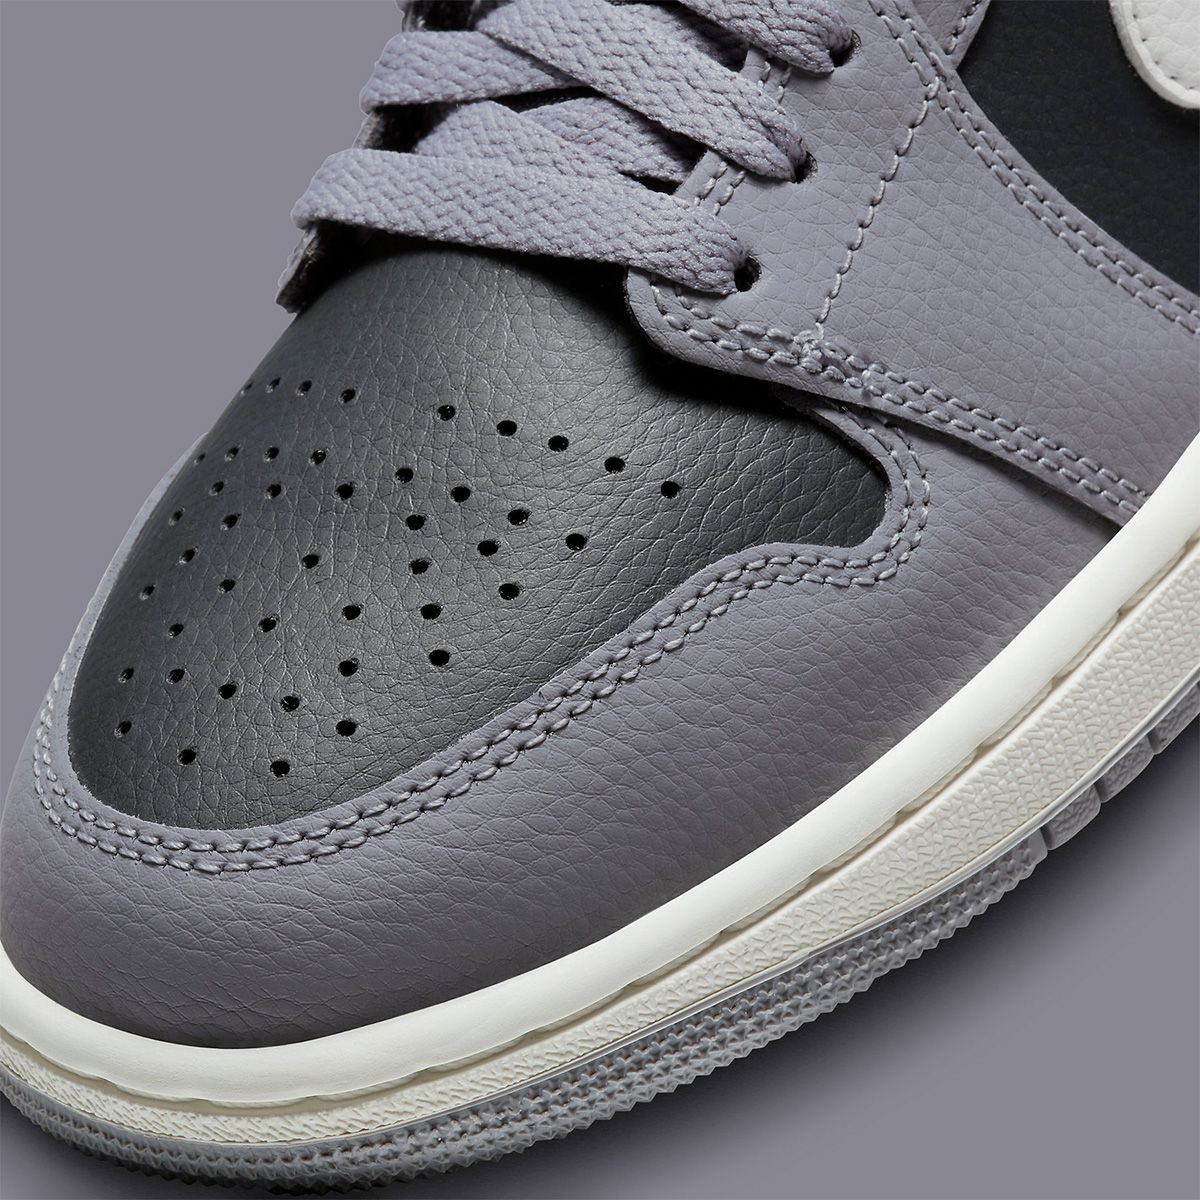 Available Now // Air Jordan 1 Mid in Cement Grey, Sail and Anthracite ...